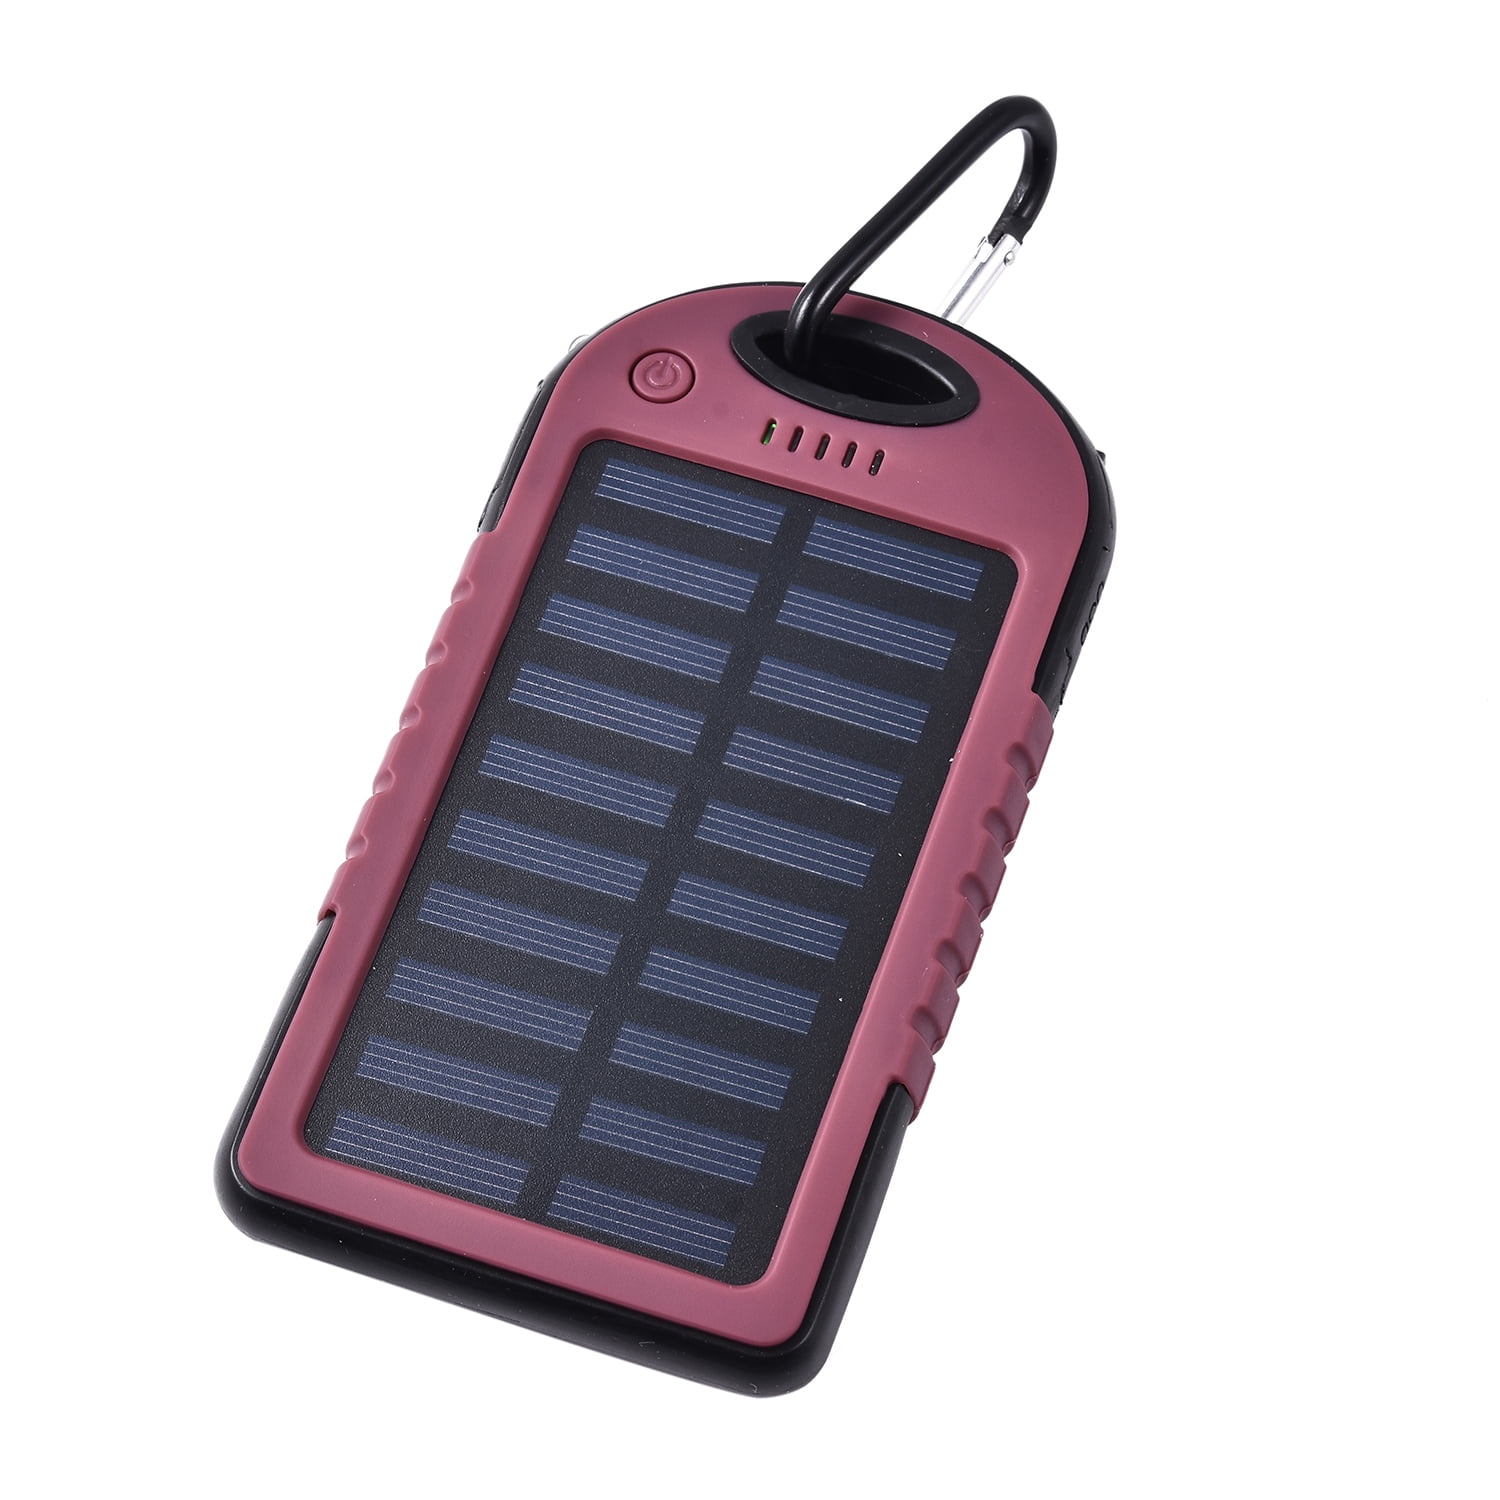 Carabiner Solar 5000 mAh Battery Charger with USB Emergency LED Torch - Walmart.com